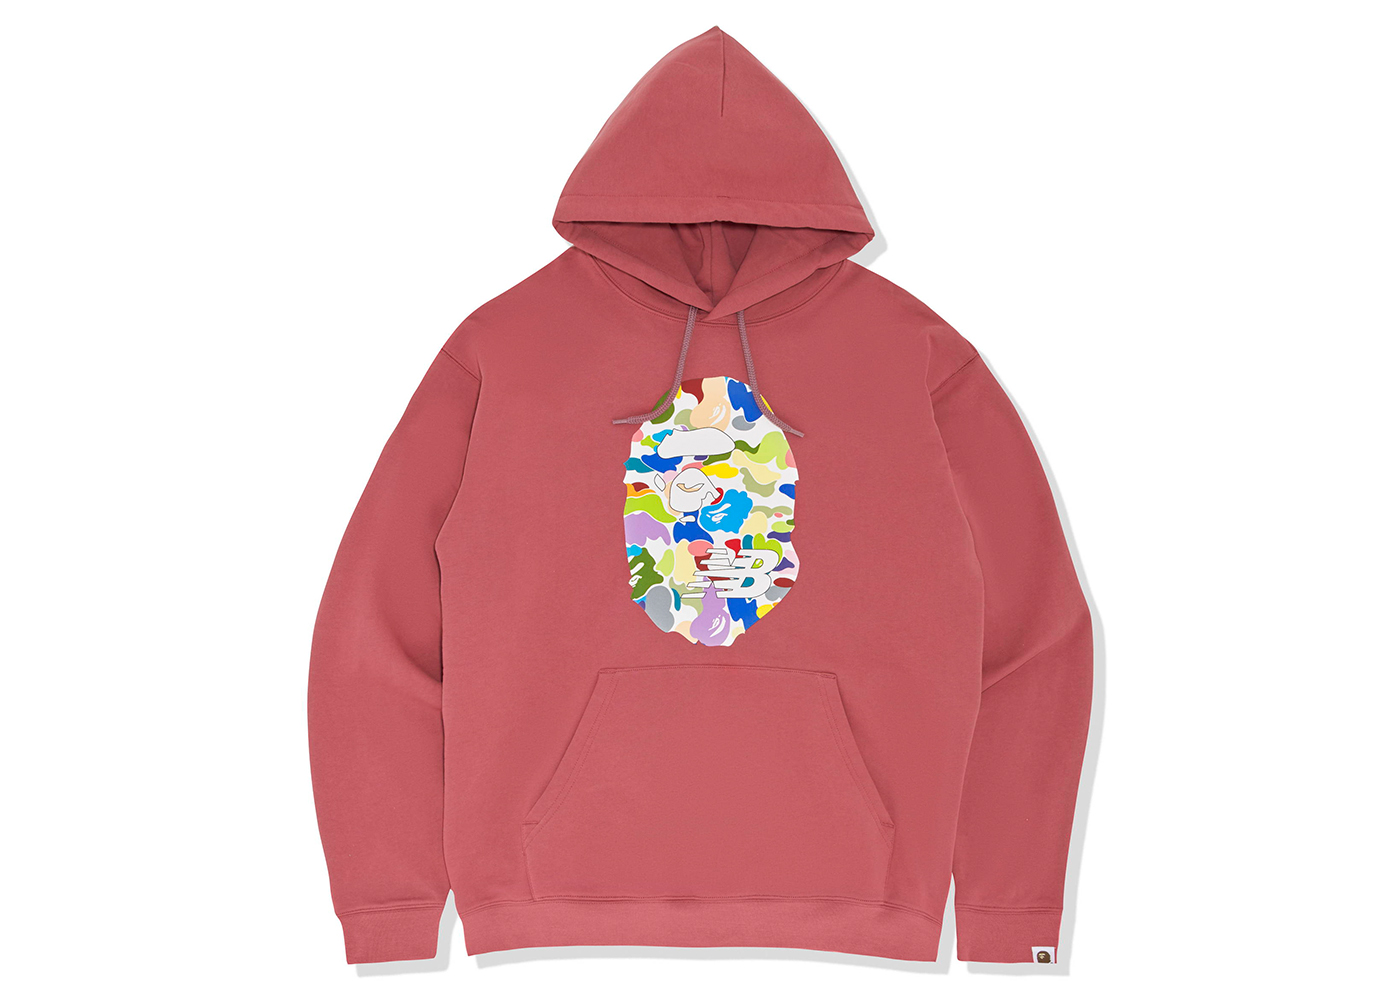 BAPE x New Balance Ape Head Relaxed Fit Pullover Hoodie Red Men's ...